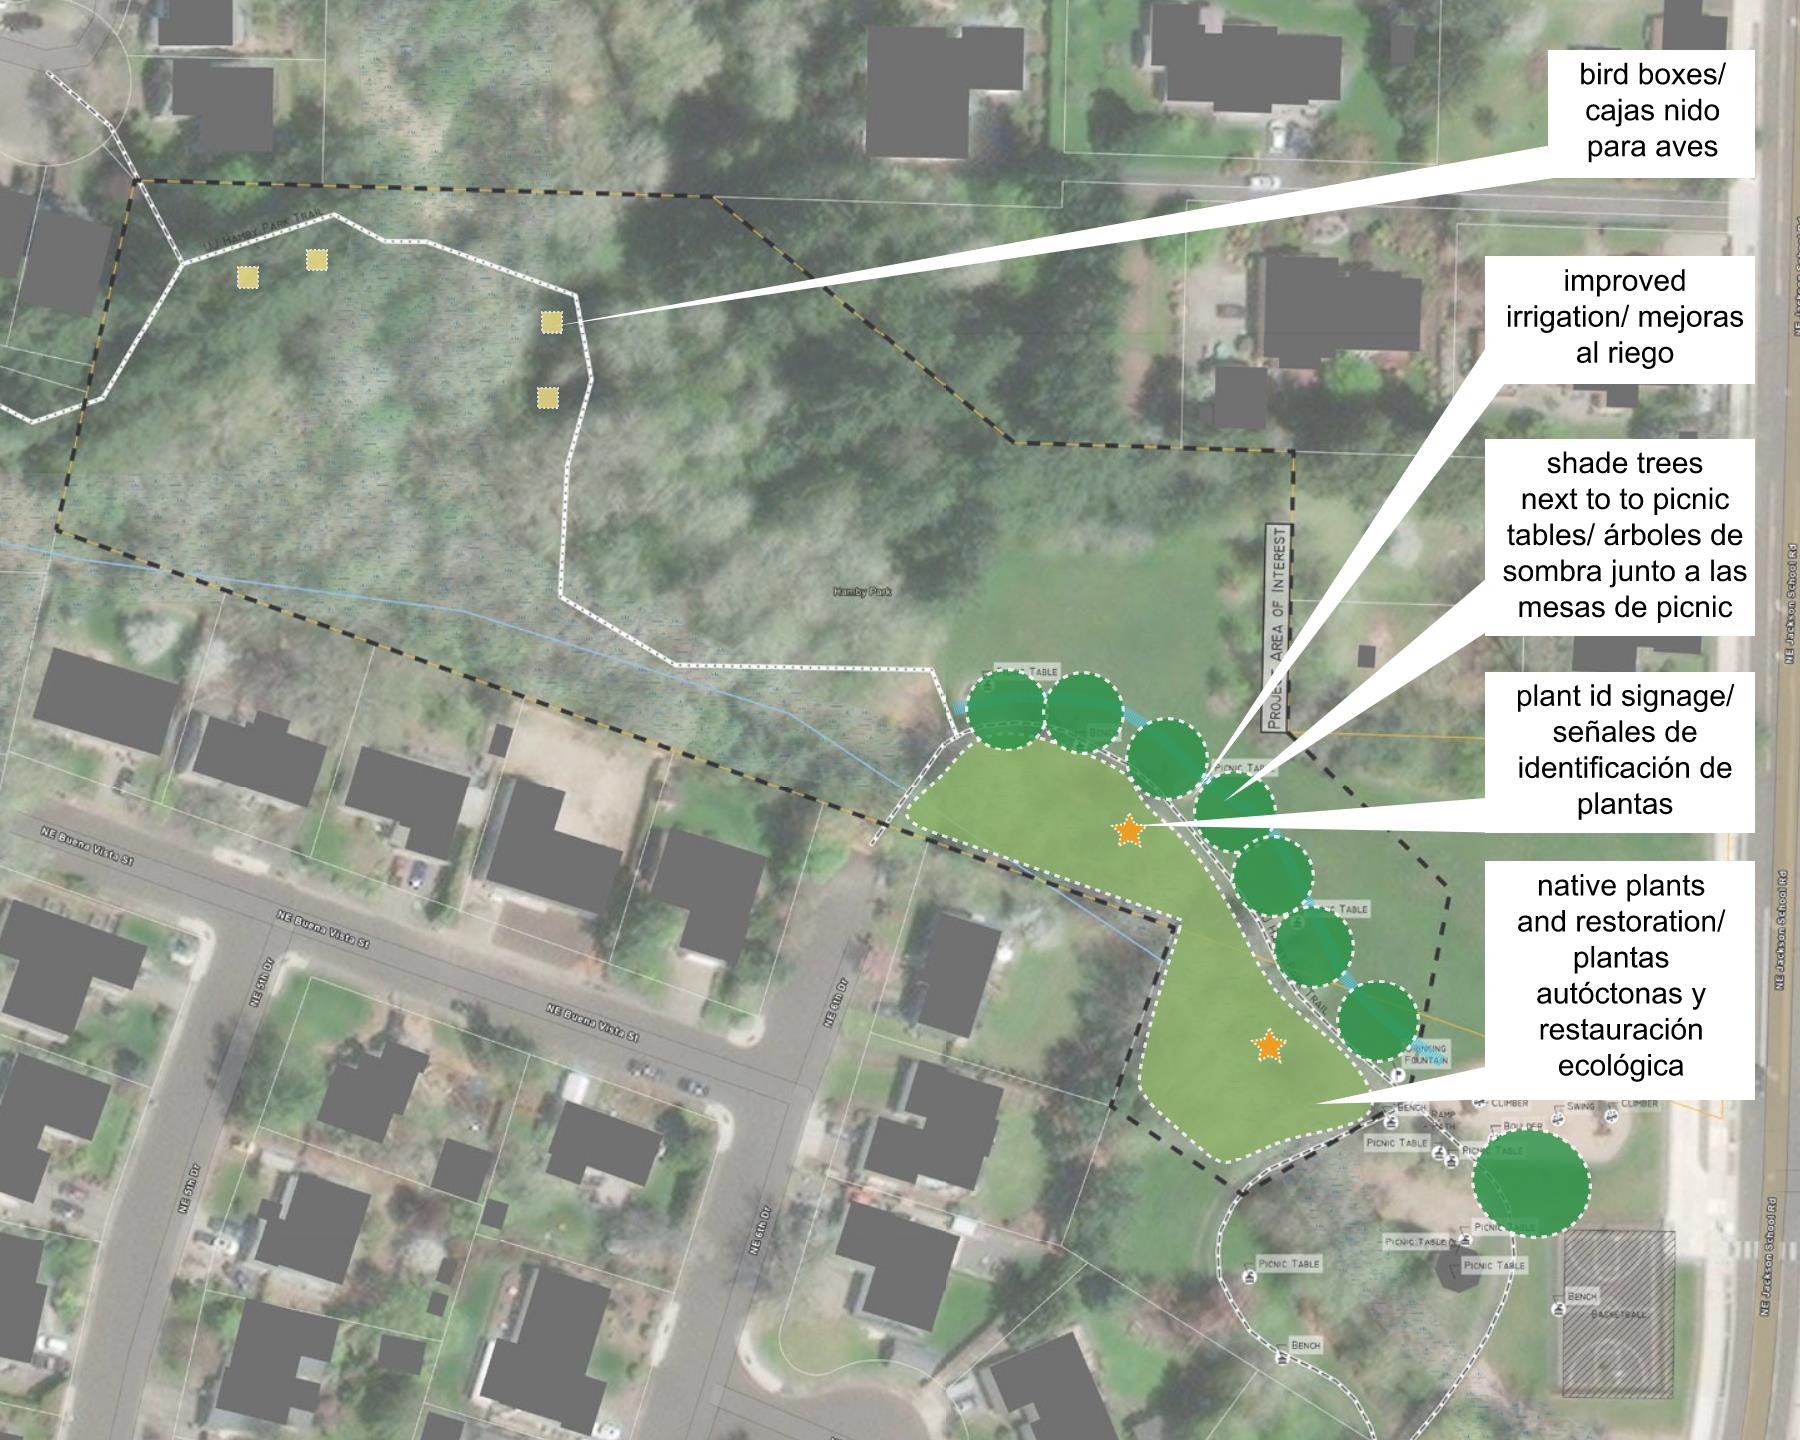 Image alt text: Located off NE Jackson School Road and nestled between clusters of homes, new trees will shade picnic tables near the existing park area. Further back into the site along a footpath, a native plant and restoration area with plant ID signage will be on the south side of the path, shade trees and picnic tables on the north side of the path, and bird boxes nestled along the path furthest from the road. Improved irrigation will help establish the shade tree plantings and increase resiliency of the plantings during heat events.